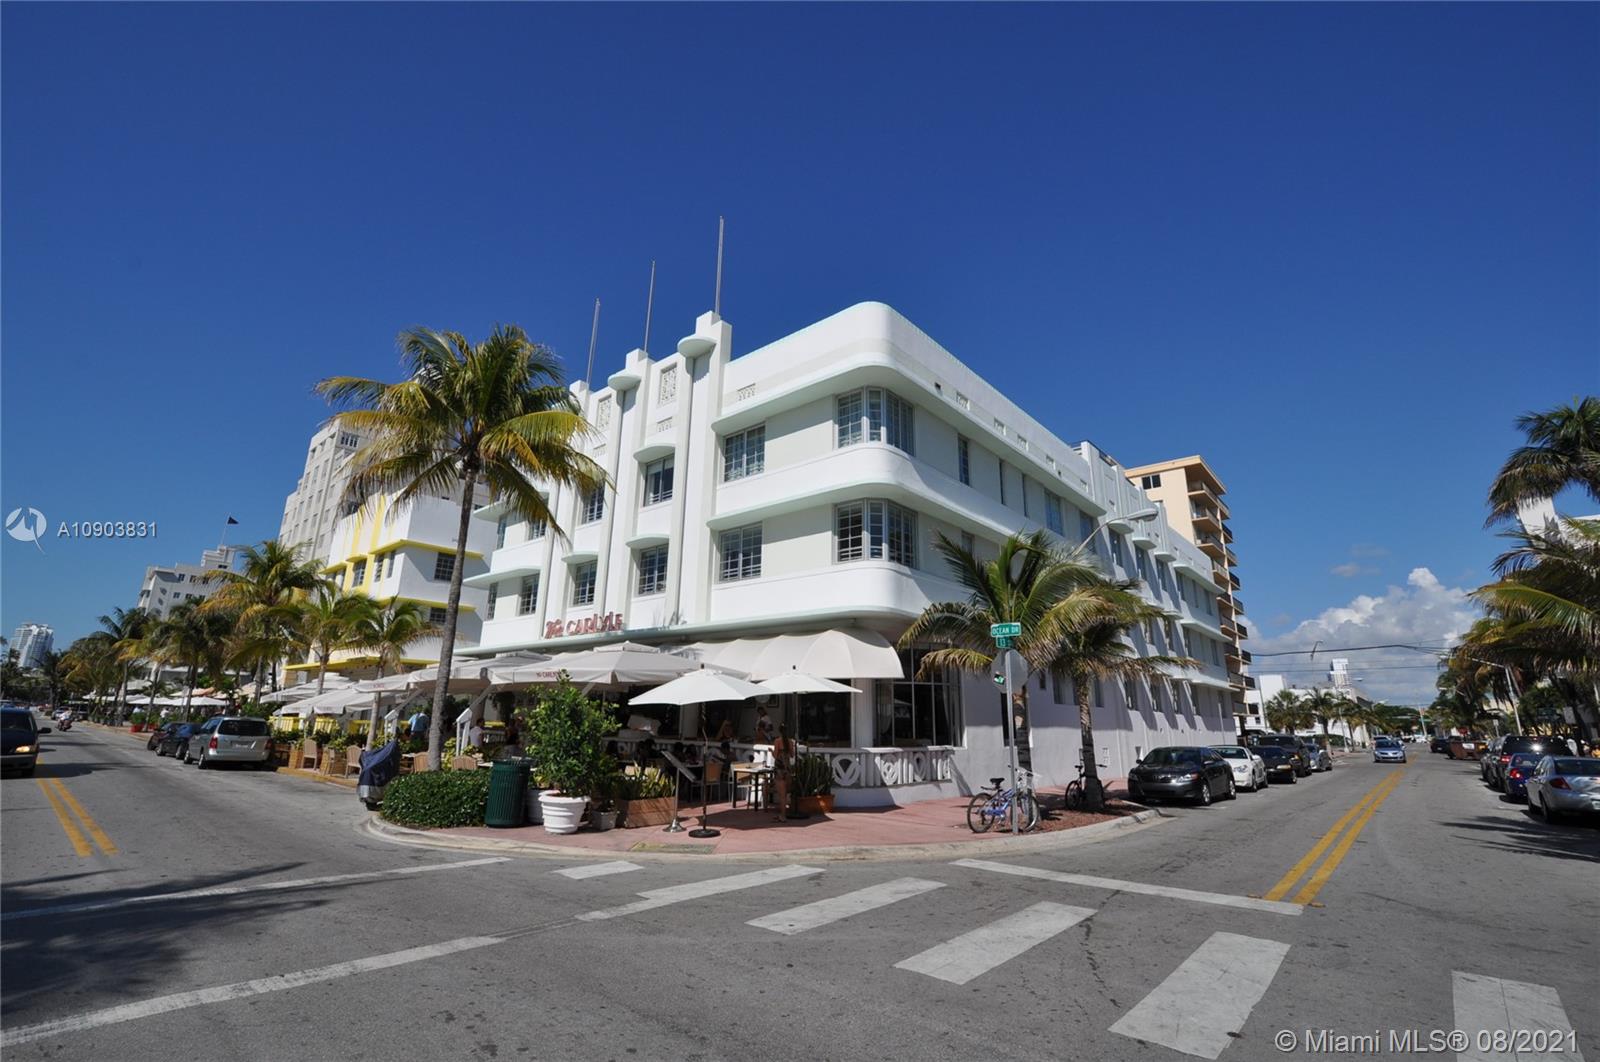 Photo 1 of The Carlyle Deco Hotel Co Apt 4B in Miami Beach - MLS A10903831